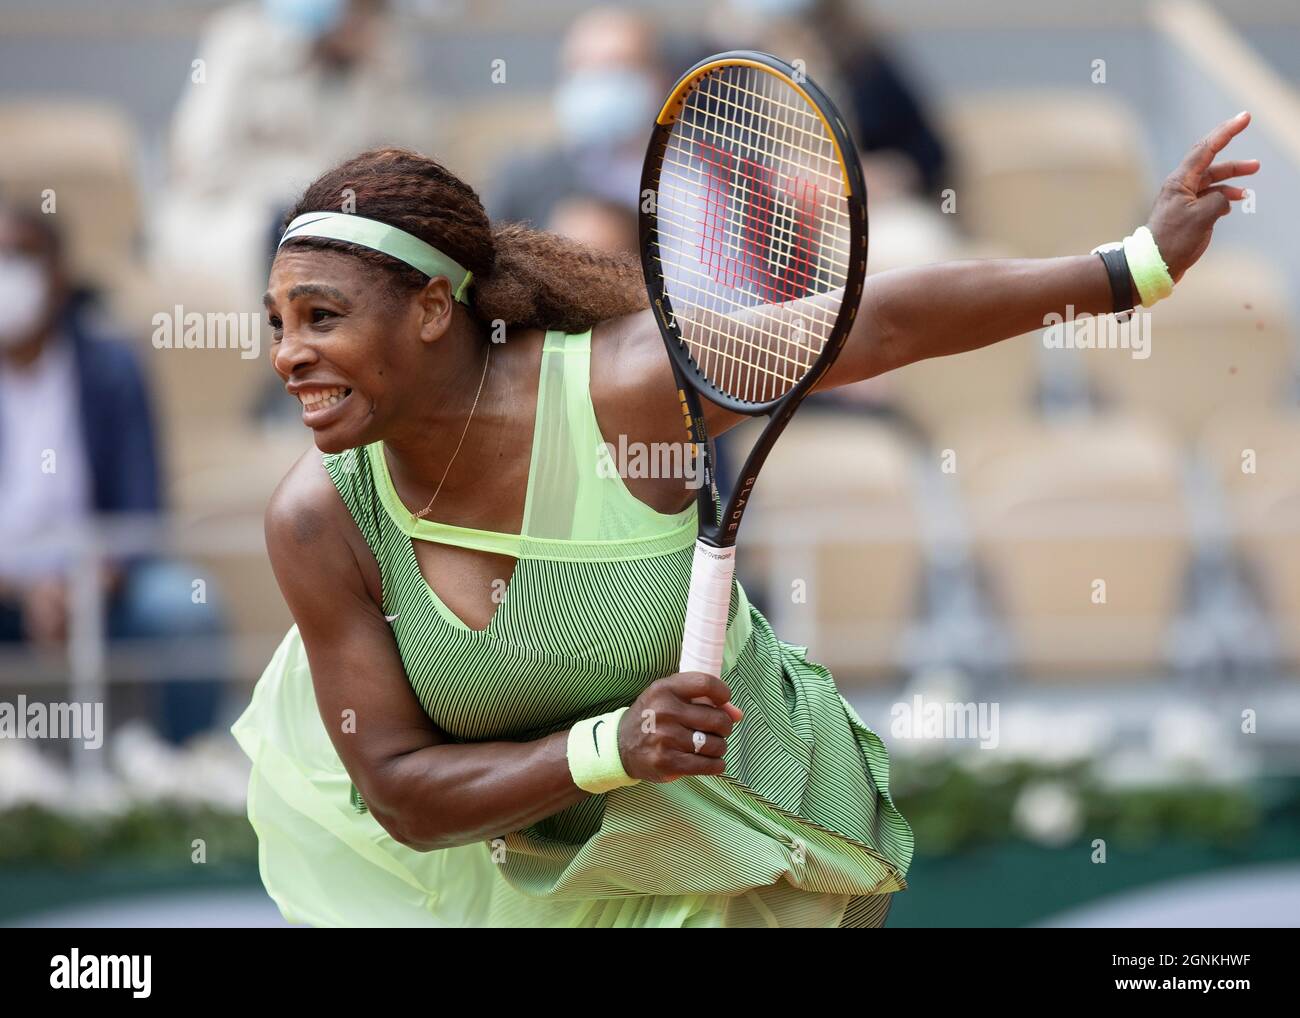 US tennis player Serena Williams (USA) playing a service shot, French Open 2021 tennis tournament, Paris, France. Stock Photo